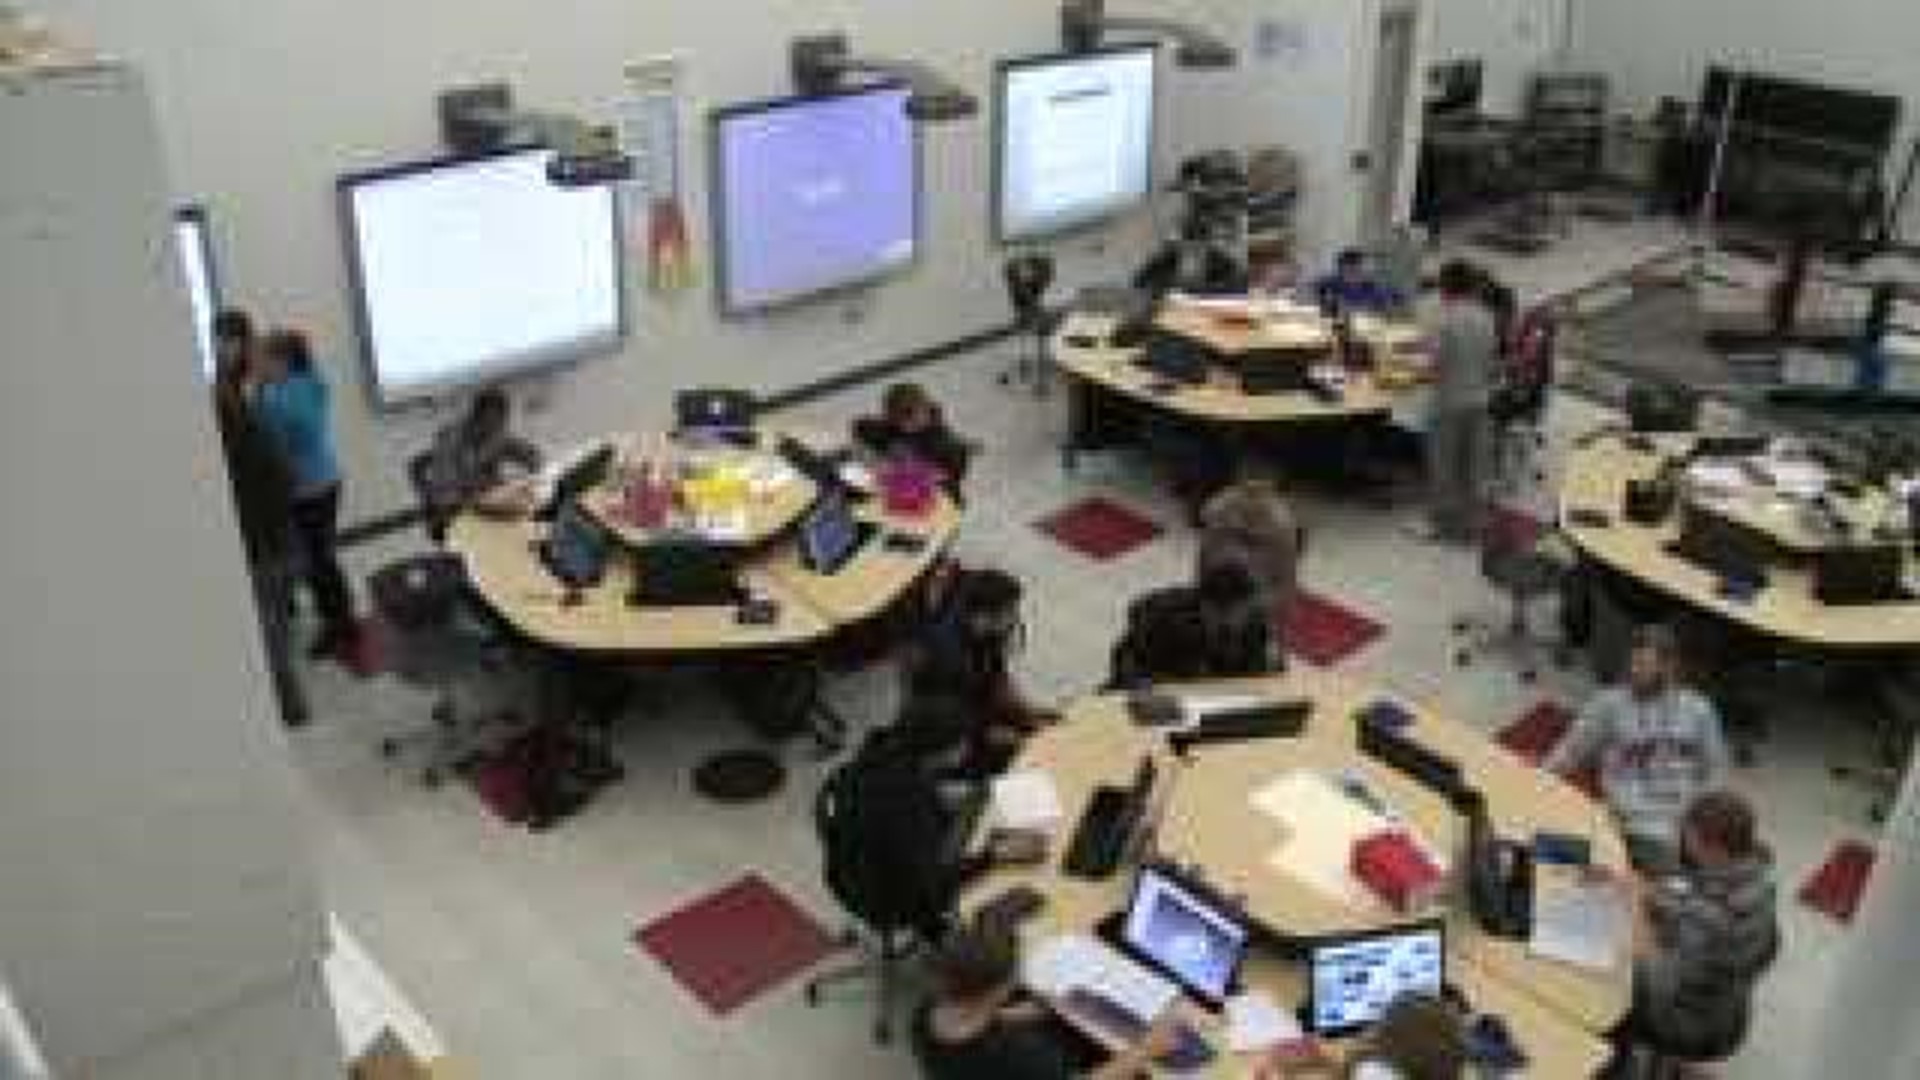 STEM Grant to offer Davenport West new open learning classroom